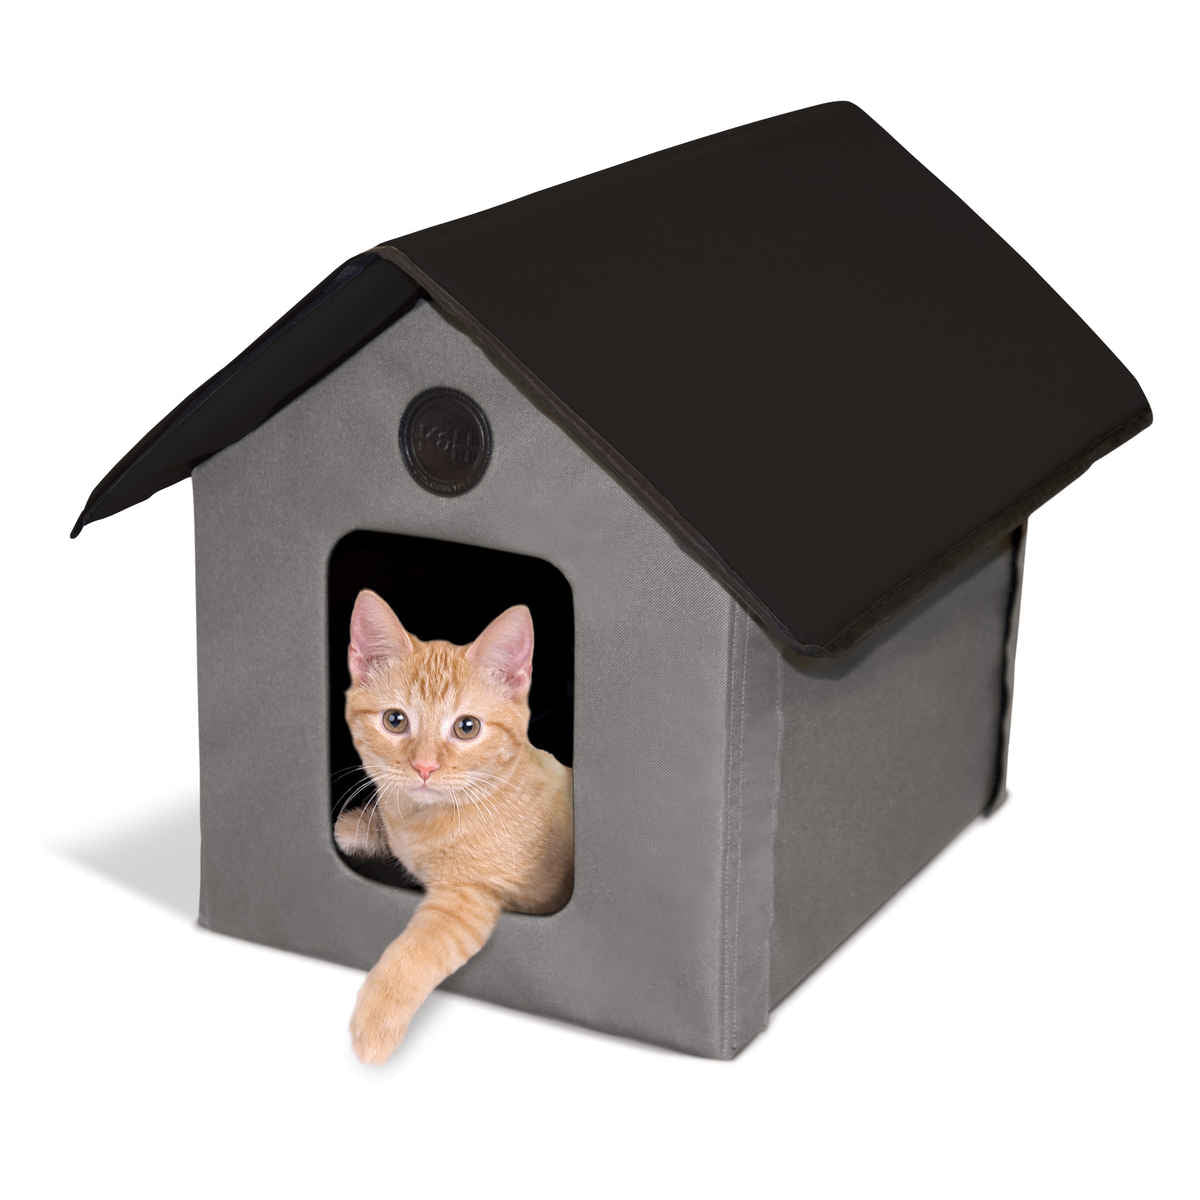 K&h Pet Products Kh3997 Unheated Outdoor Kitty House